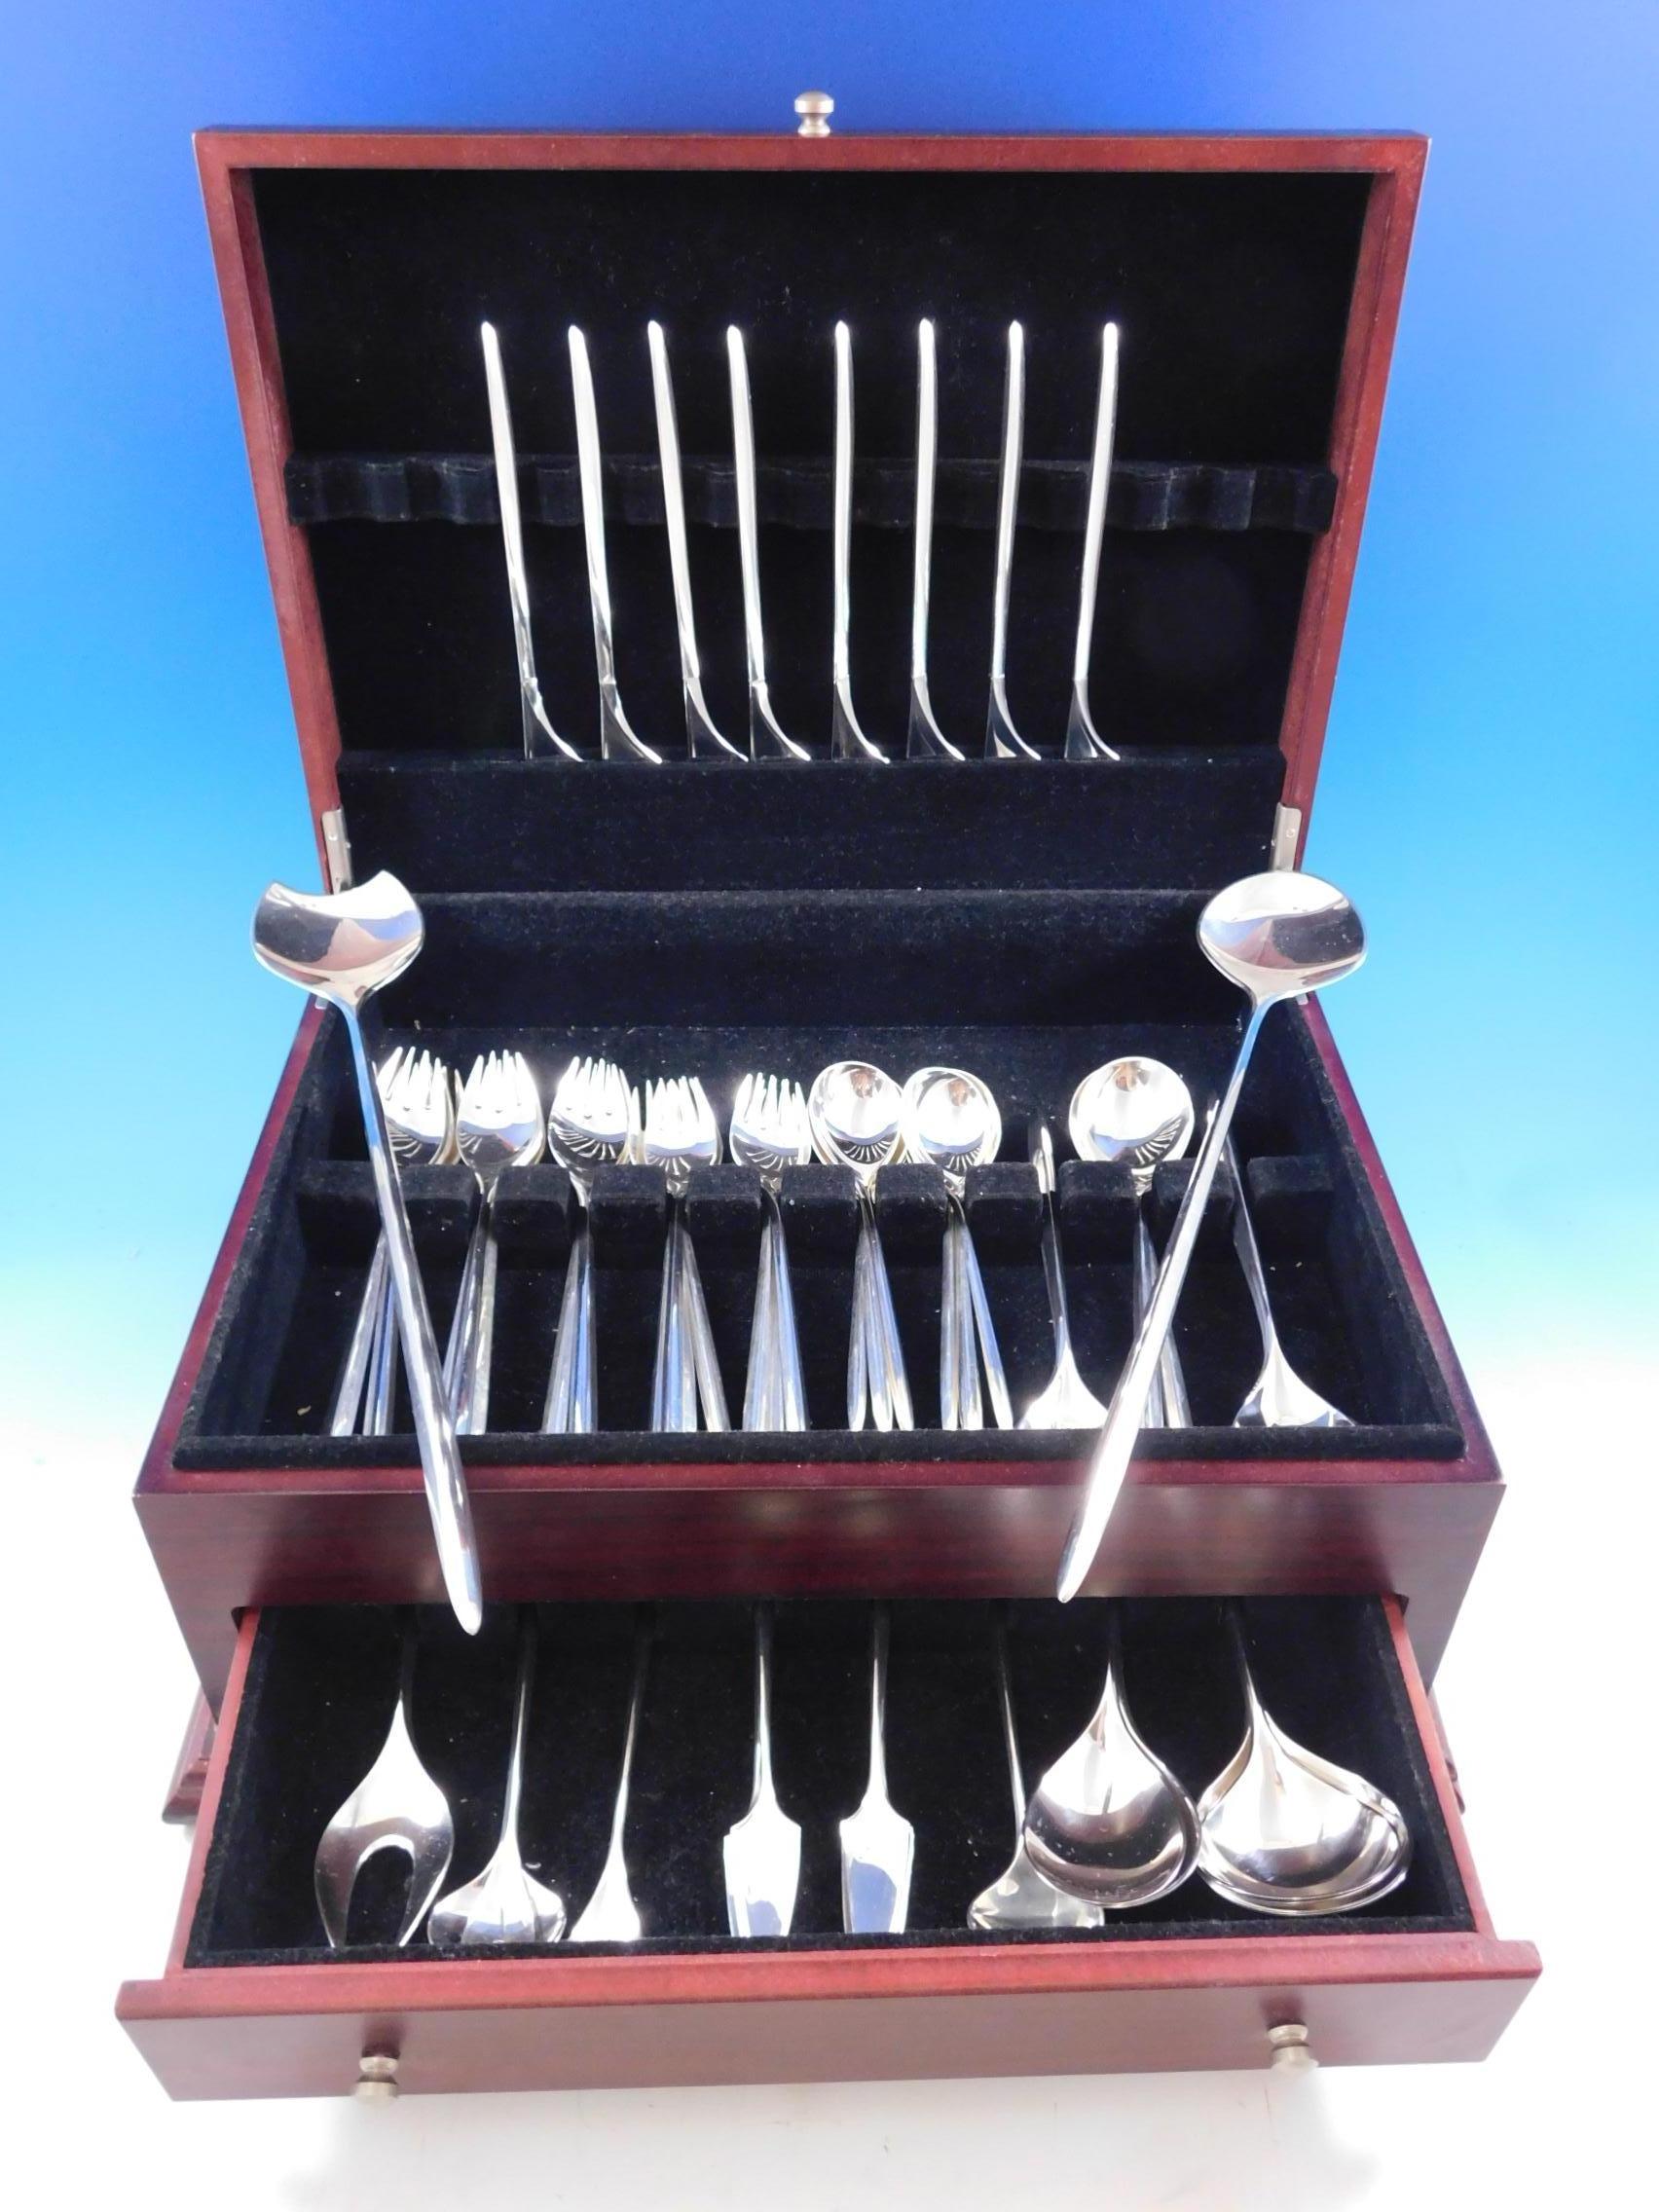 Trinita by Cohr Danish modernism sterling silver flatware set, 59 pieces. This set includes:

8 dinner knives, 8 3/8